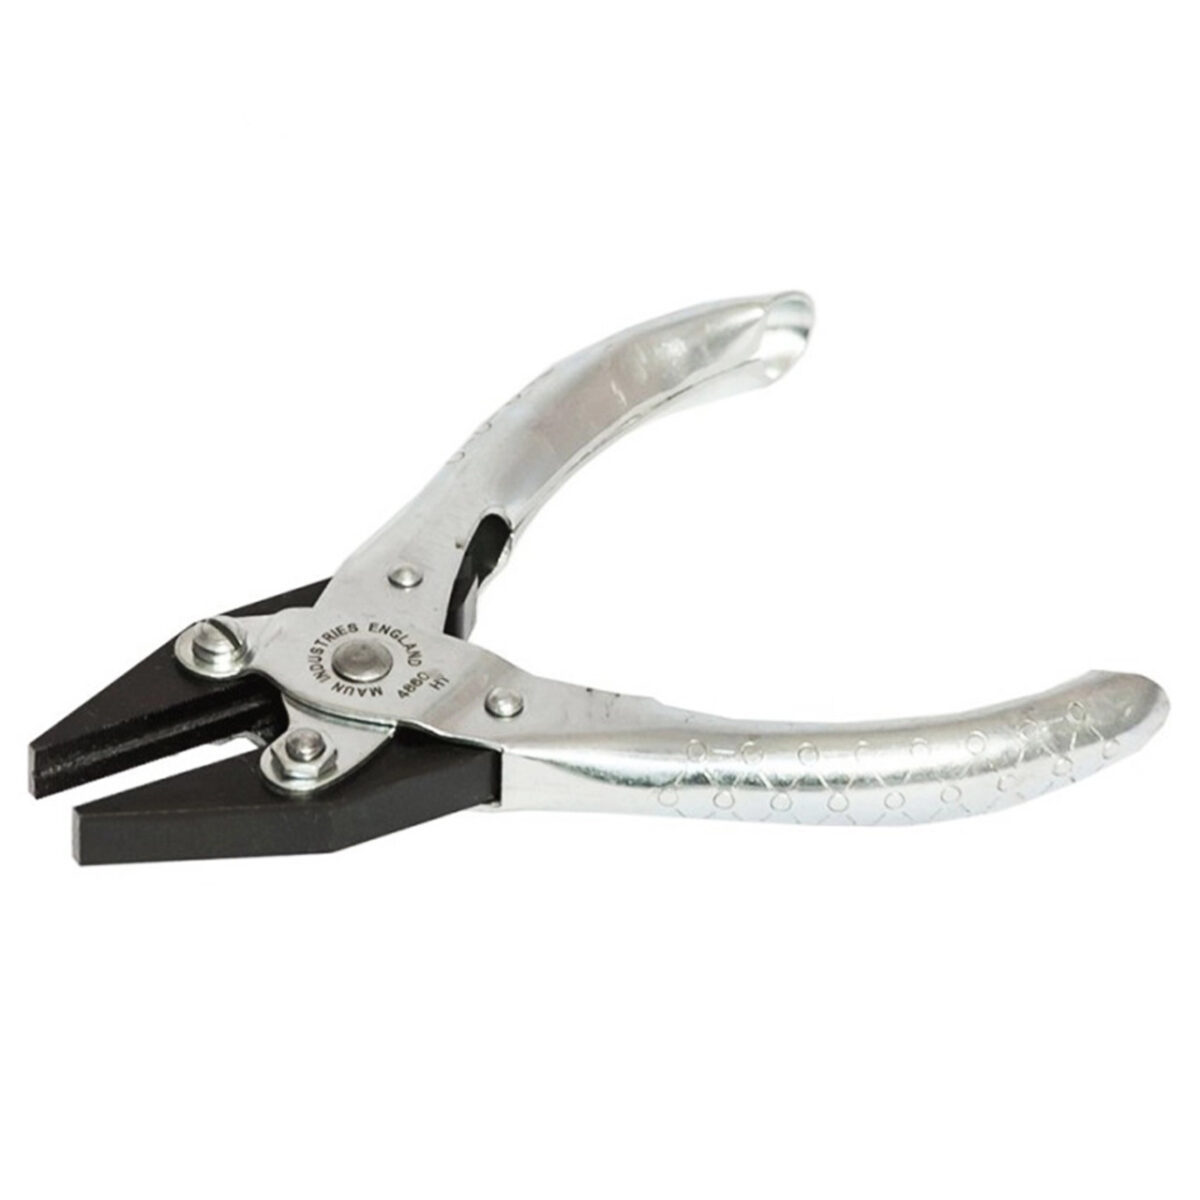 Flat Nose Serrated Jaws Parallel Plier 125mm Jeweller's Tool Maun 4860-125